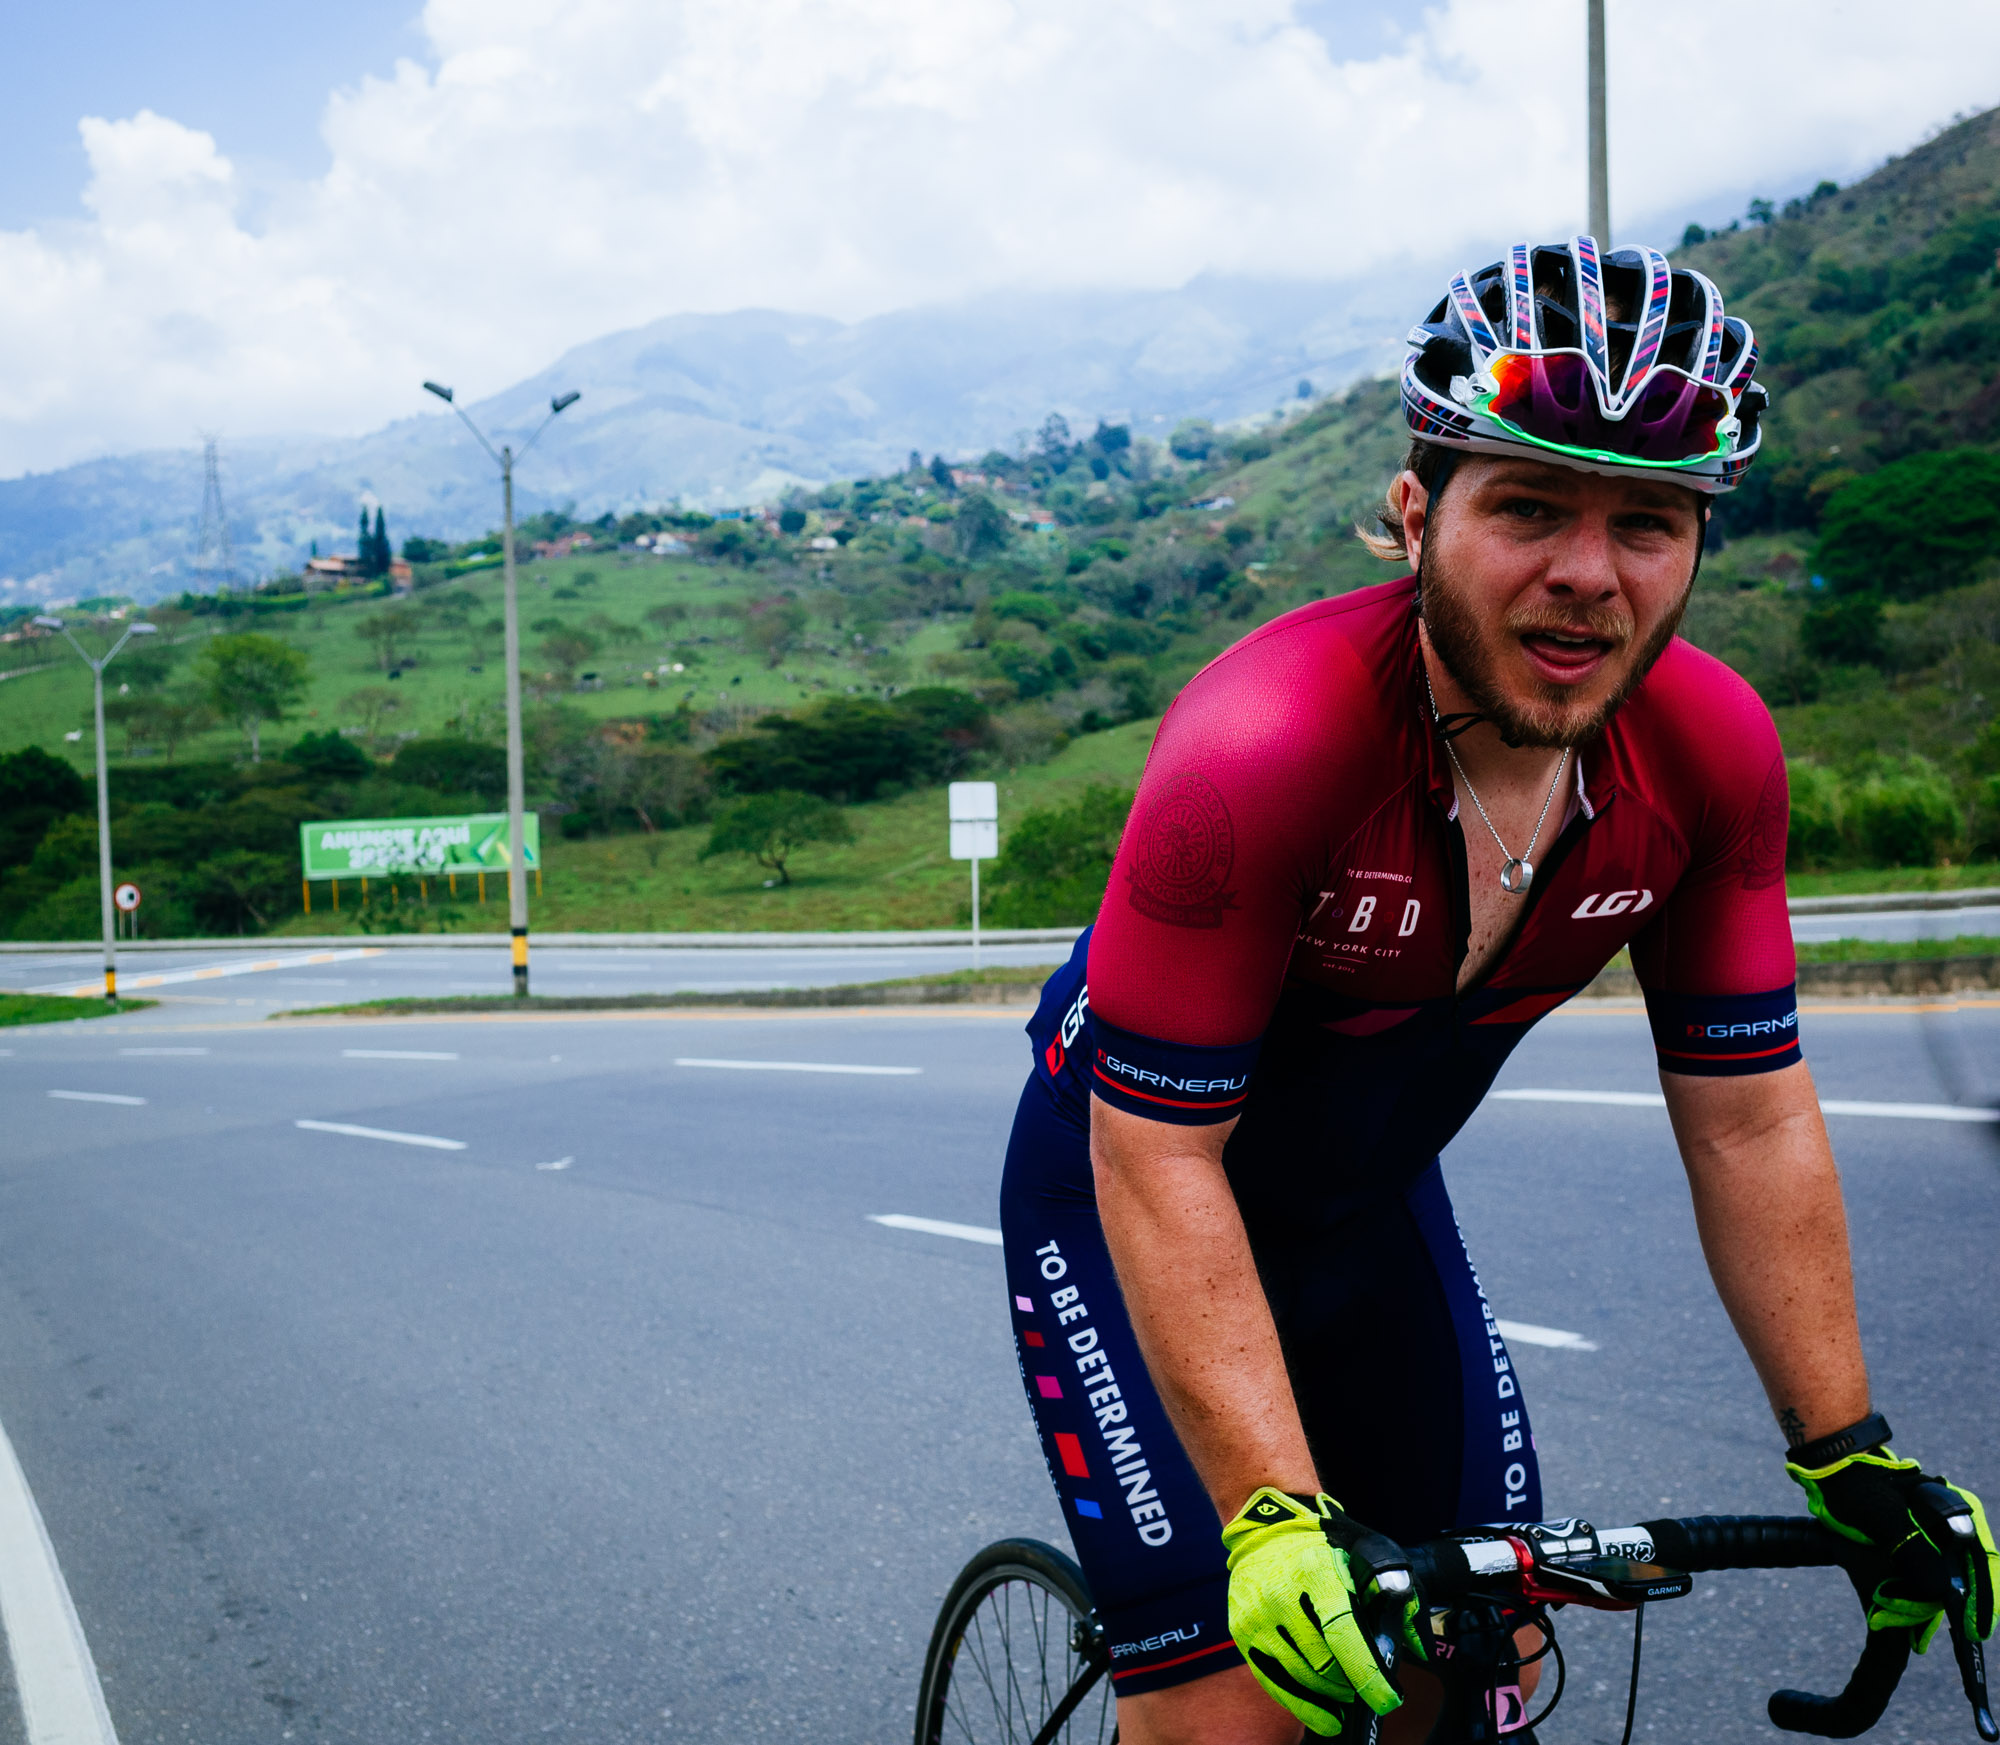 to-be-determined-photo-rhetoric-cycling-in-colombia-1007.jpg